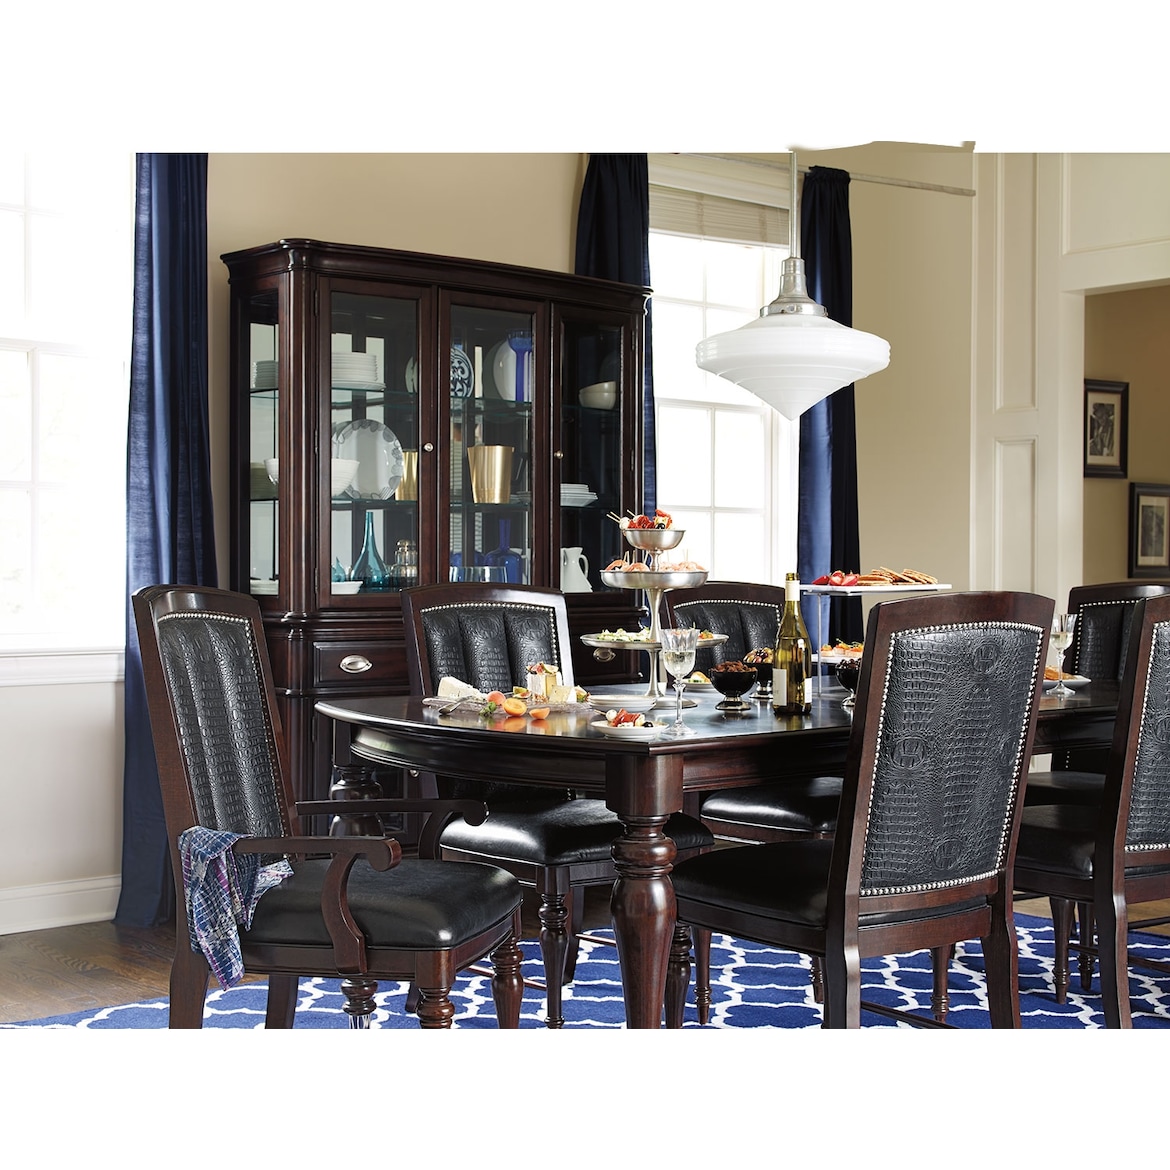 Esquire Dining Table and 6 Dining Chairs | Value City Furniture and Mattresses